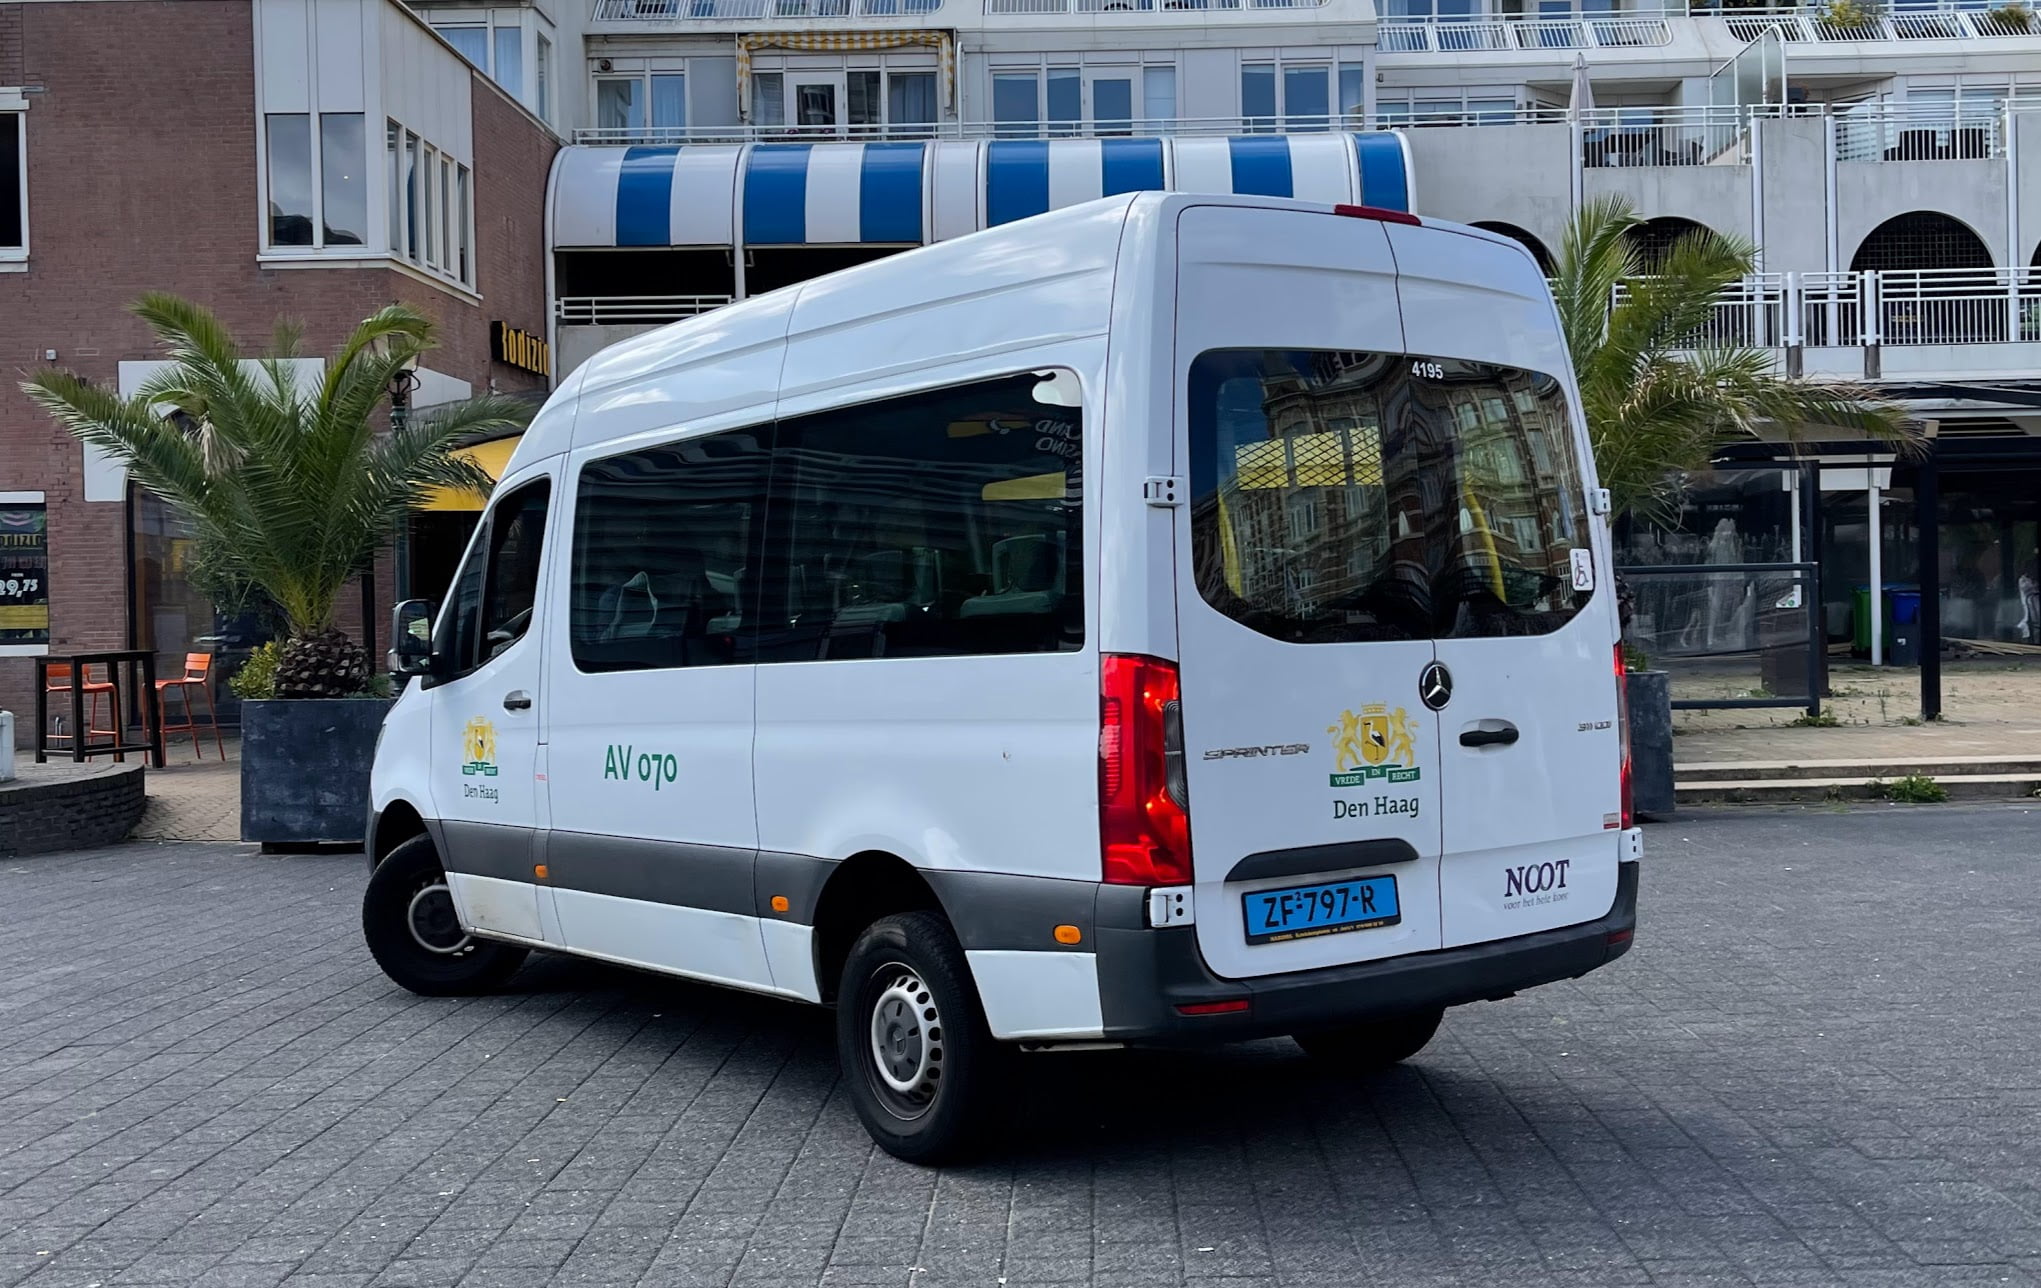 The Hague care transport is looking for 60 new drivers